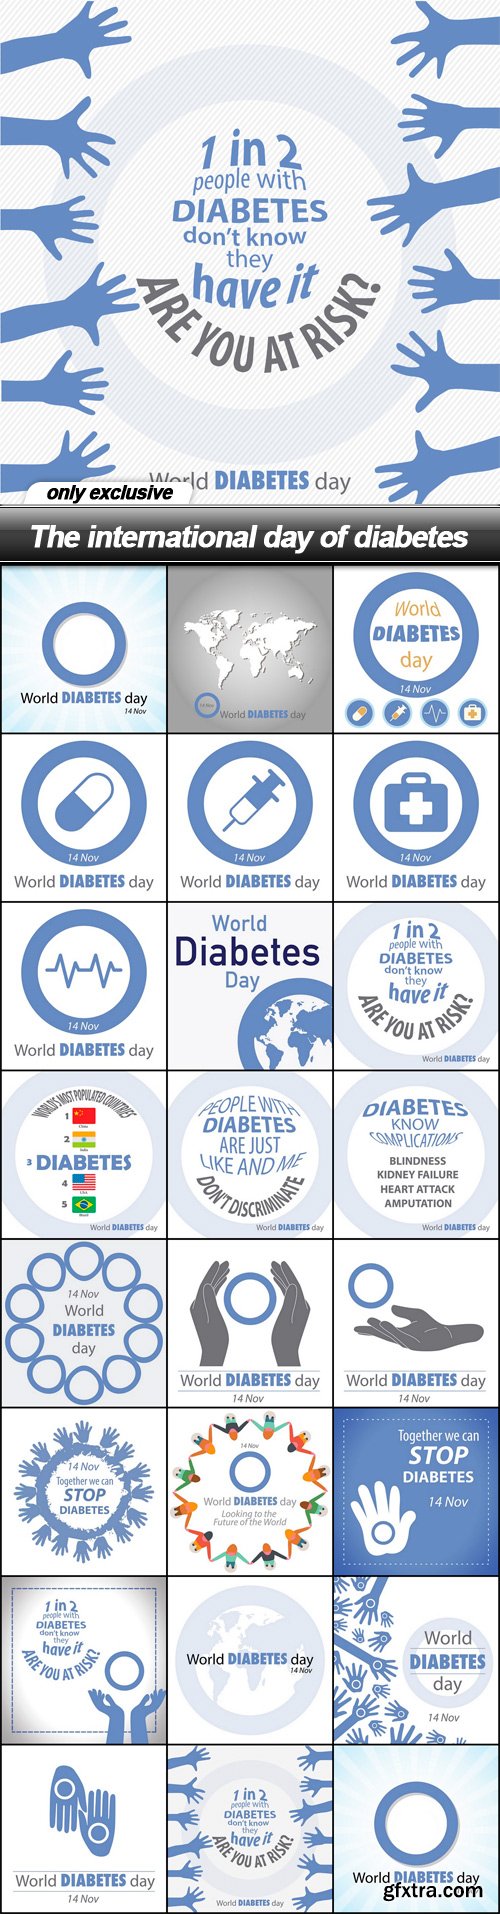 The international day of diabetes - 23 EPS